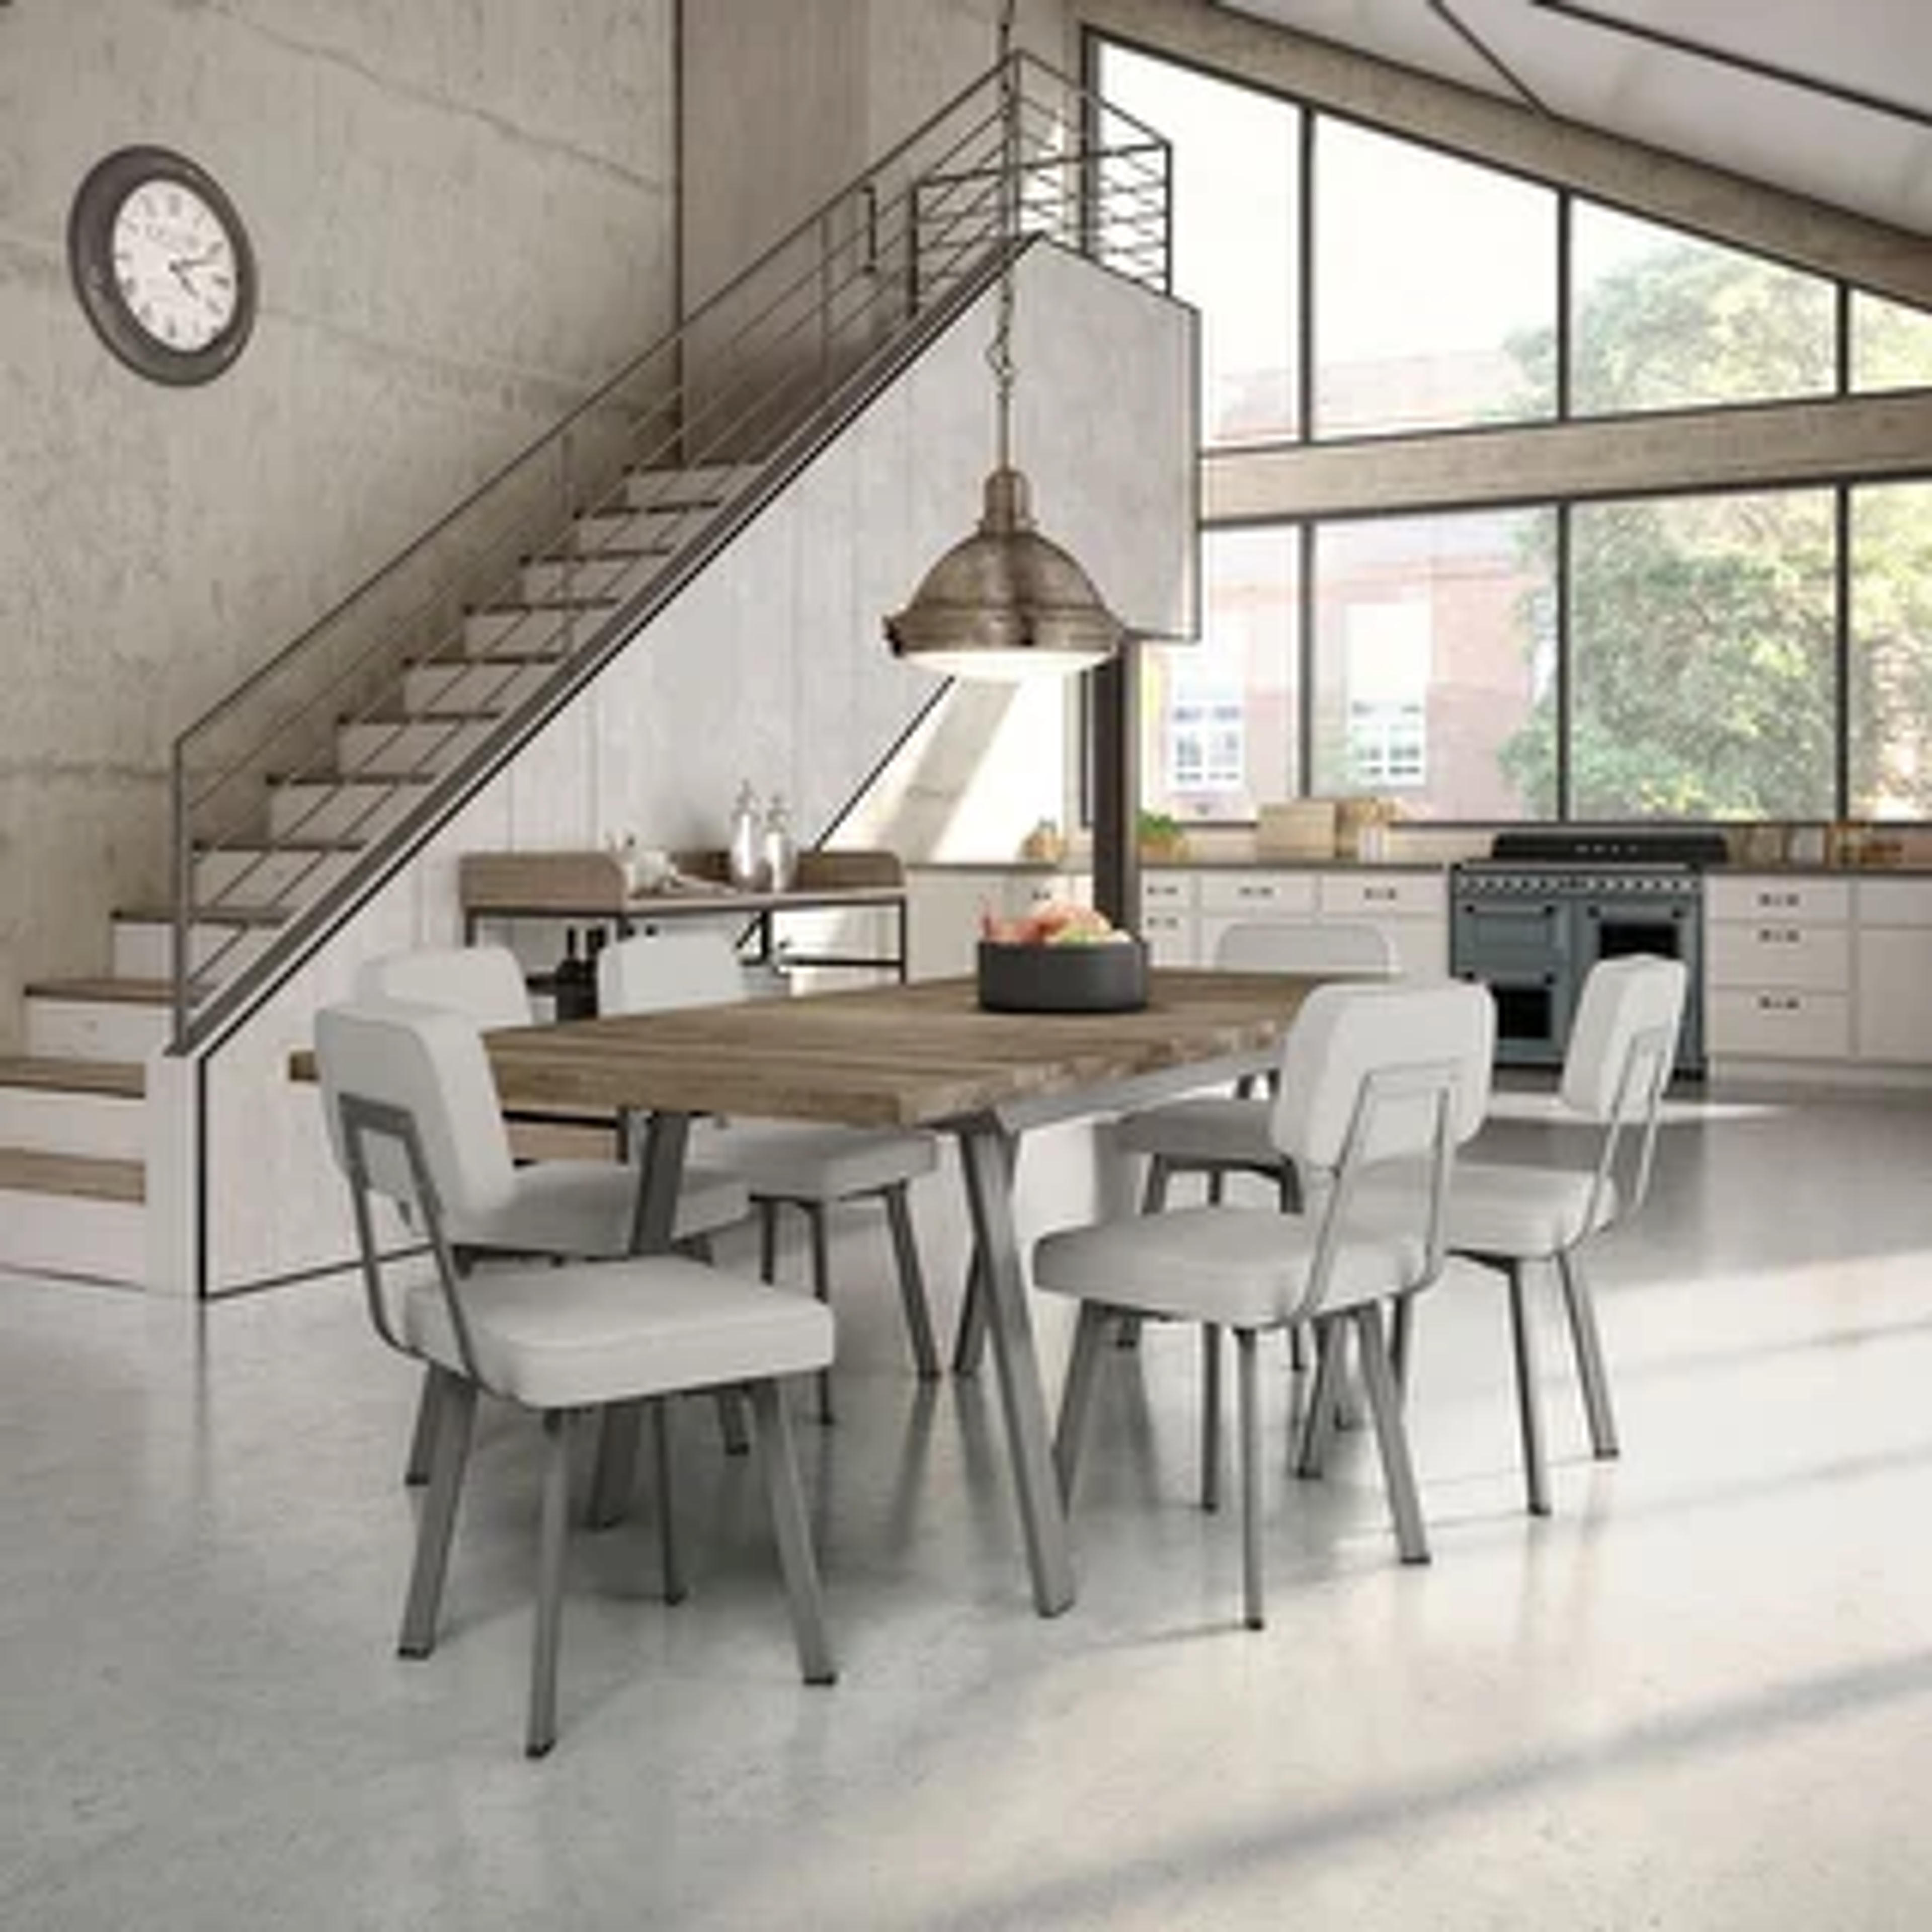 Amisco Kane Extendable Table and Clarkson Chairs Dining set - Overstock - 20306646